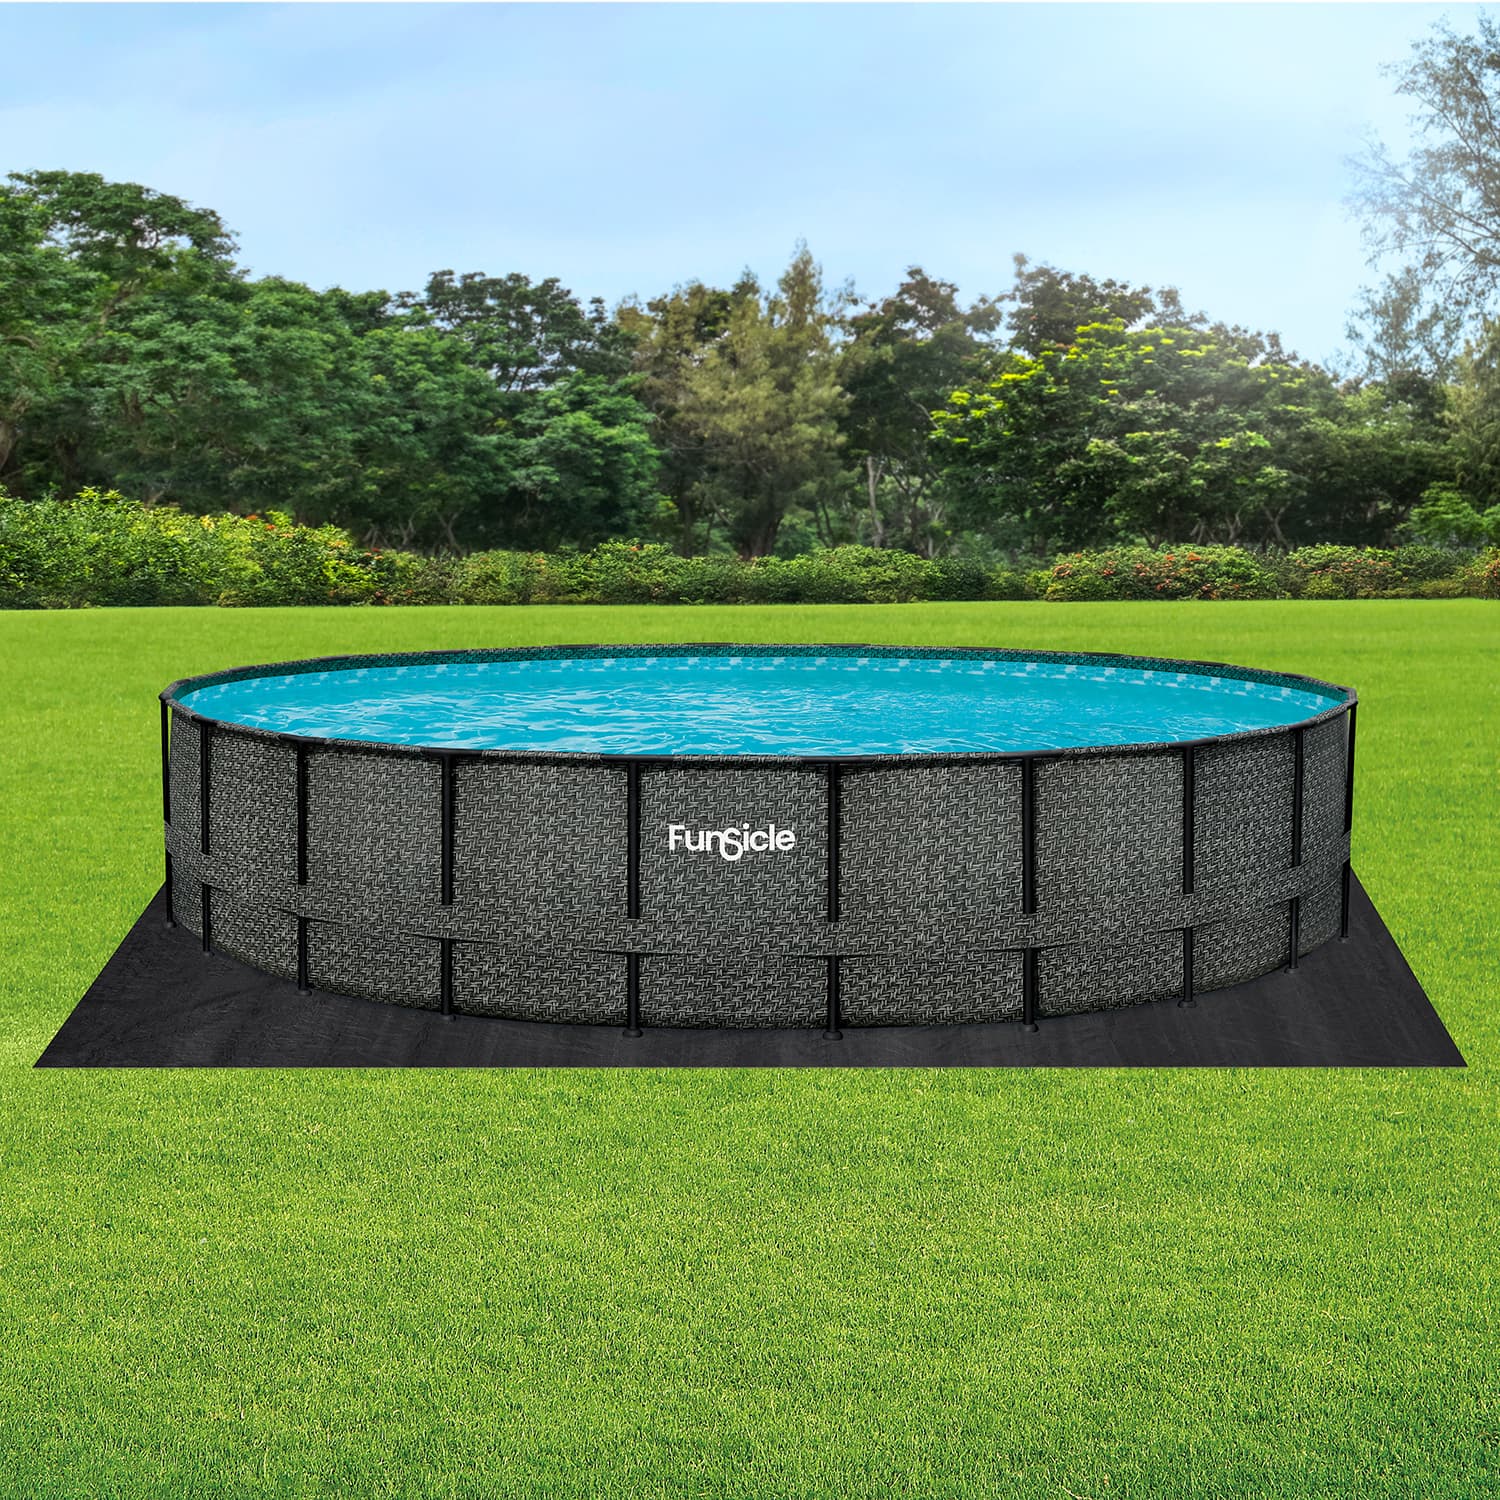 Funsicle 22.8 ft Ground Cloth with Oasis Designer Pool on a grass background